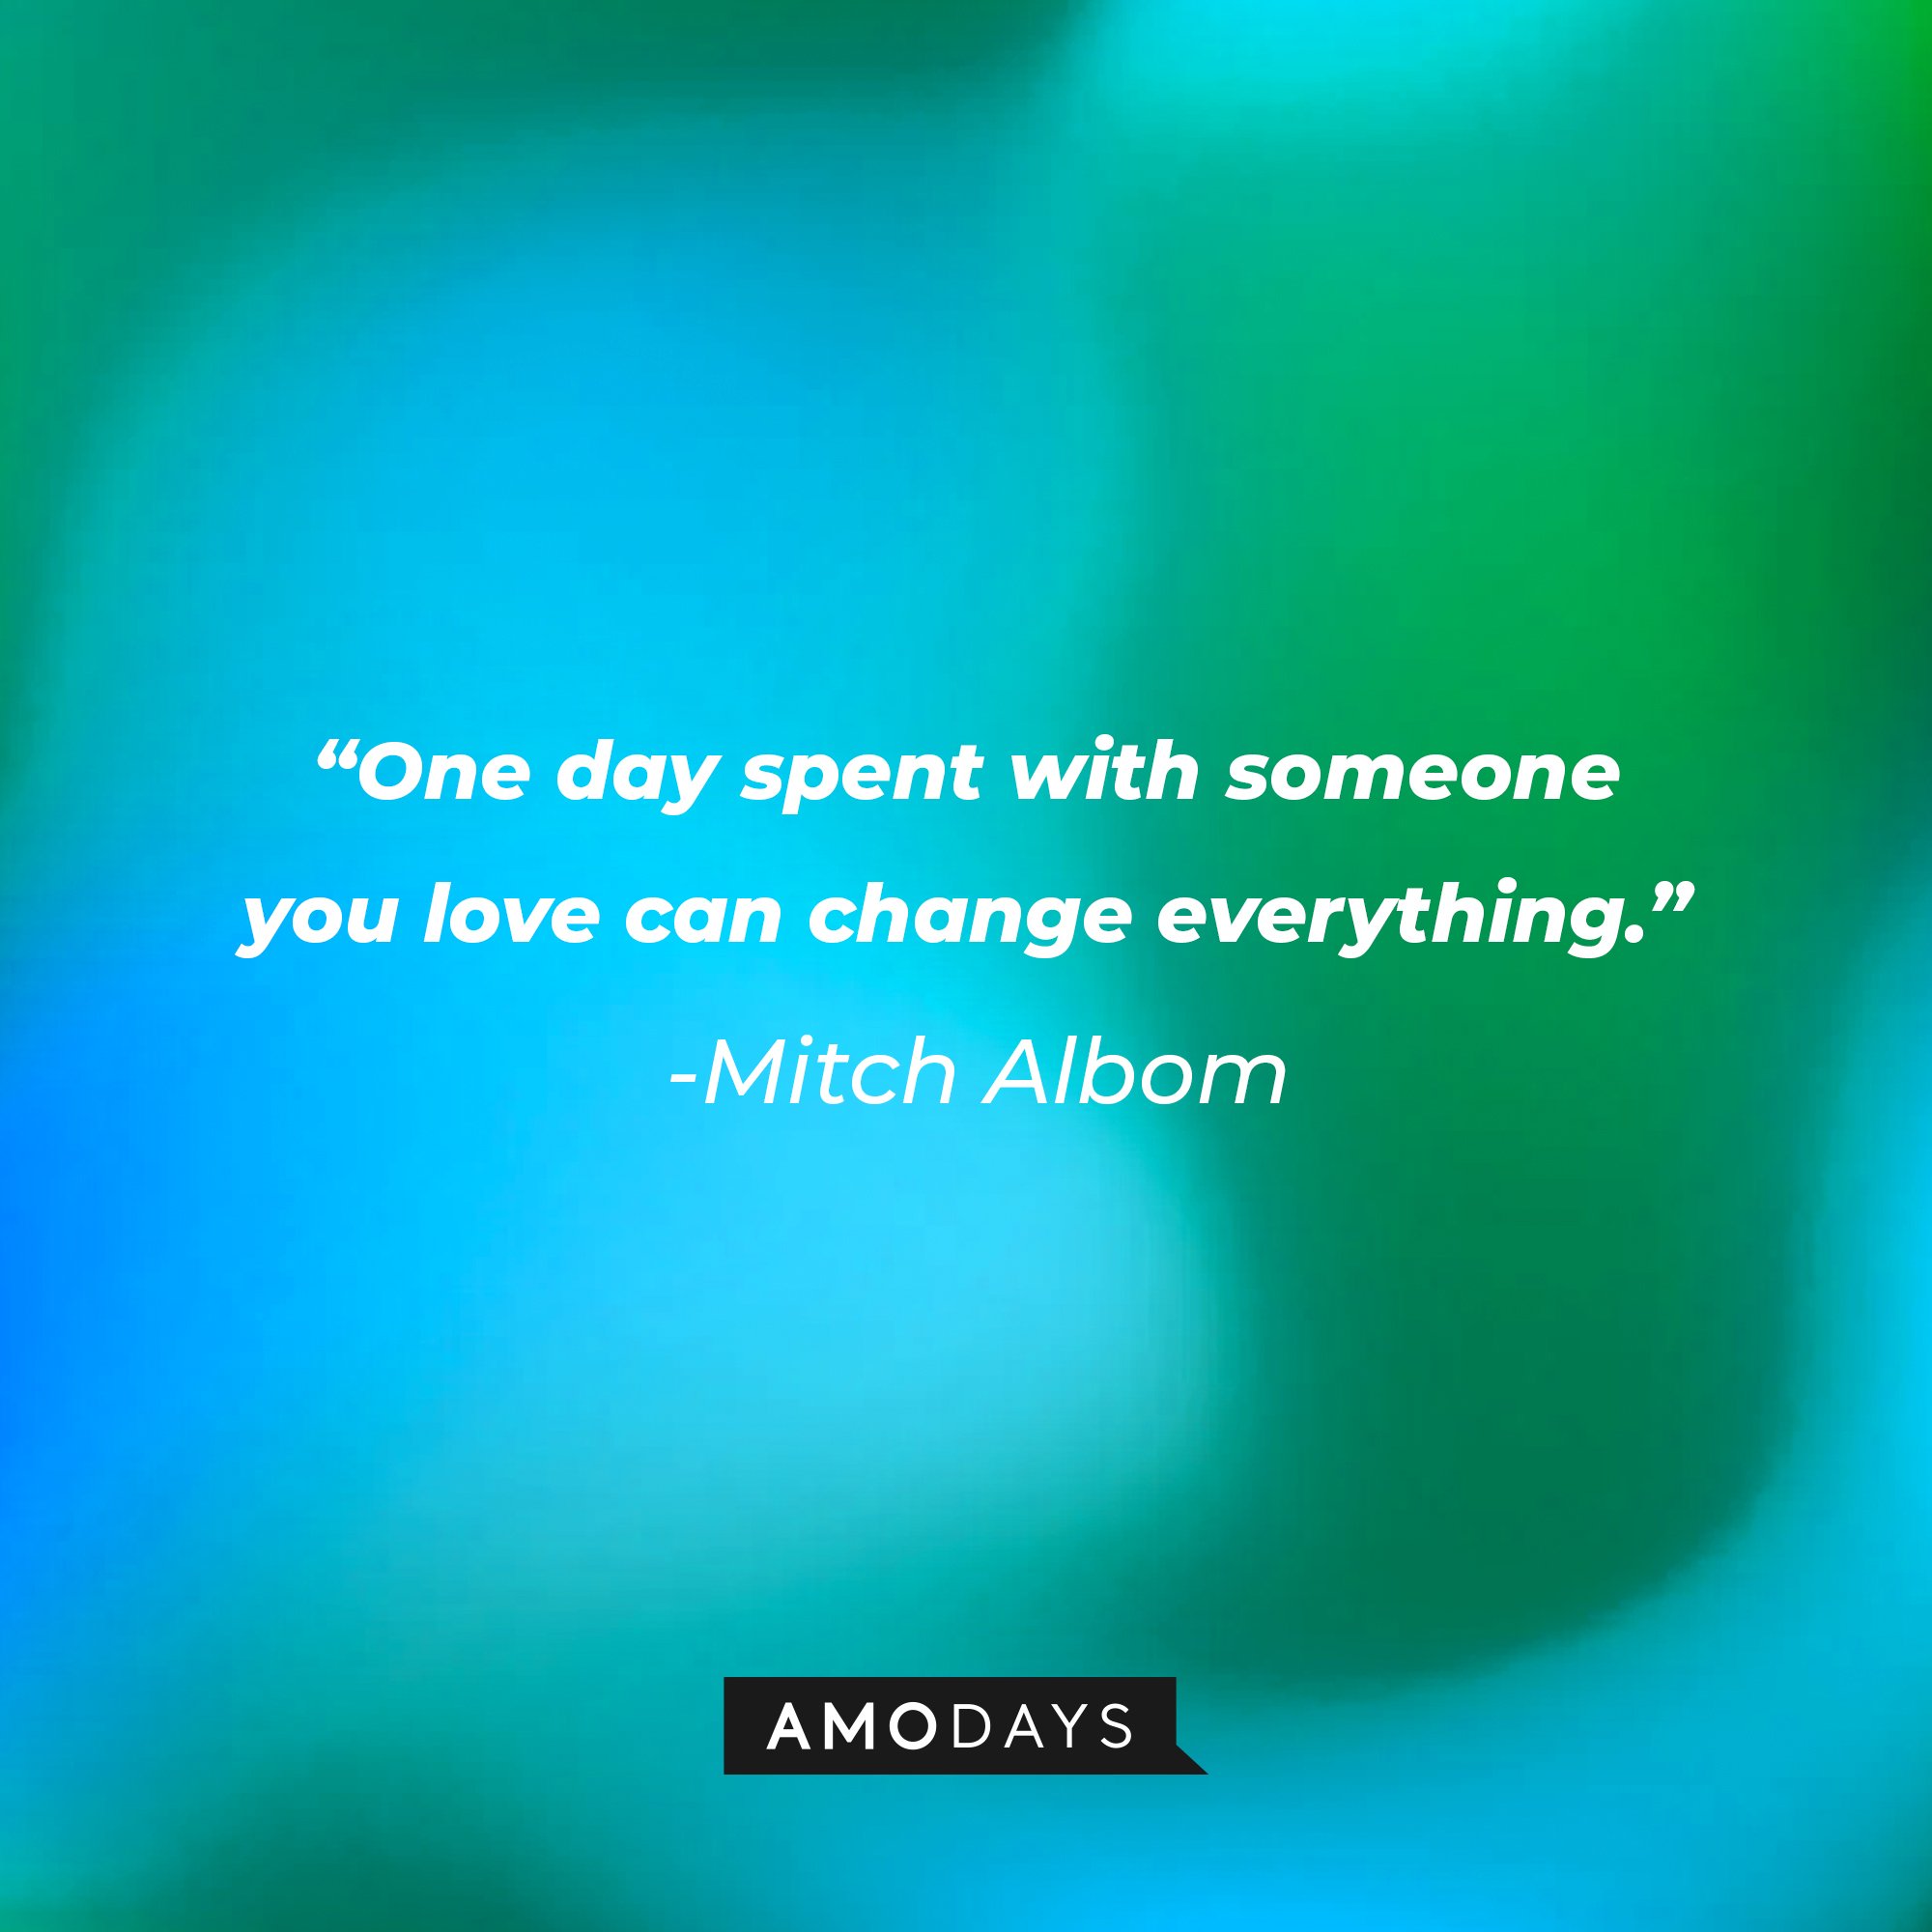 Mitch Albom's quote: "One day spent with someone you love can change everything." | Image: AmoDays